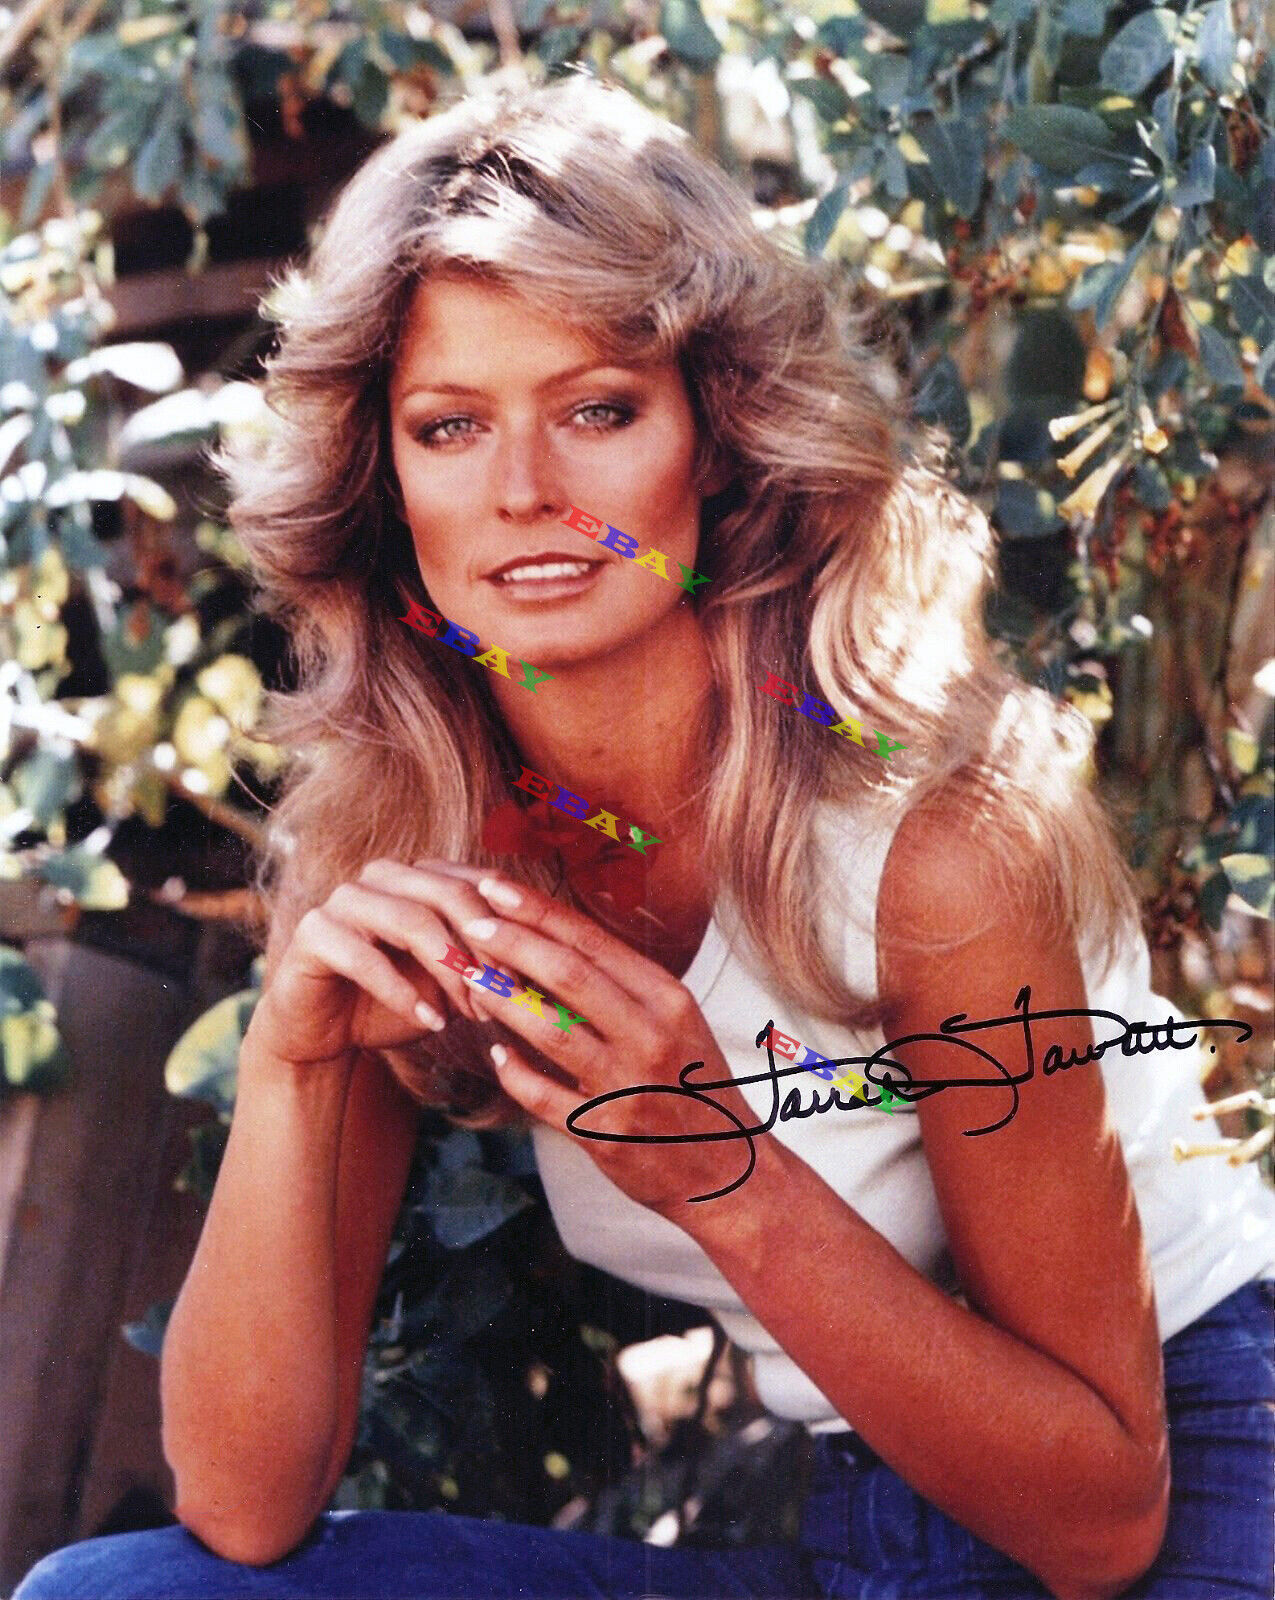 Farrah Fawcett Charlie's Angels Autographed Signed 8x10 Photo Poster painting Reprint